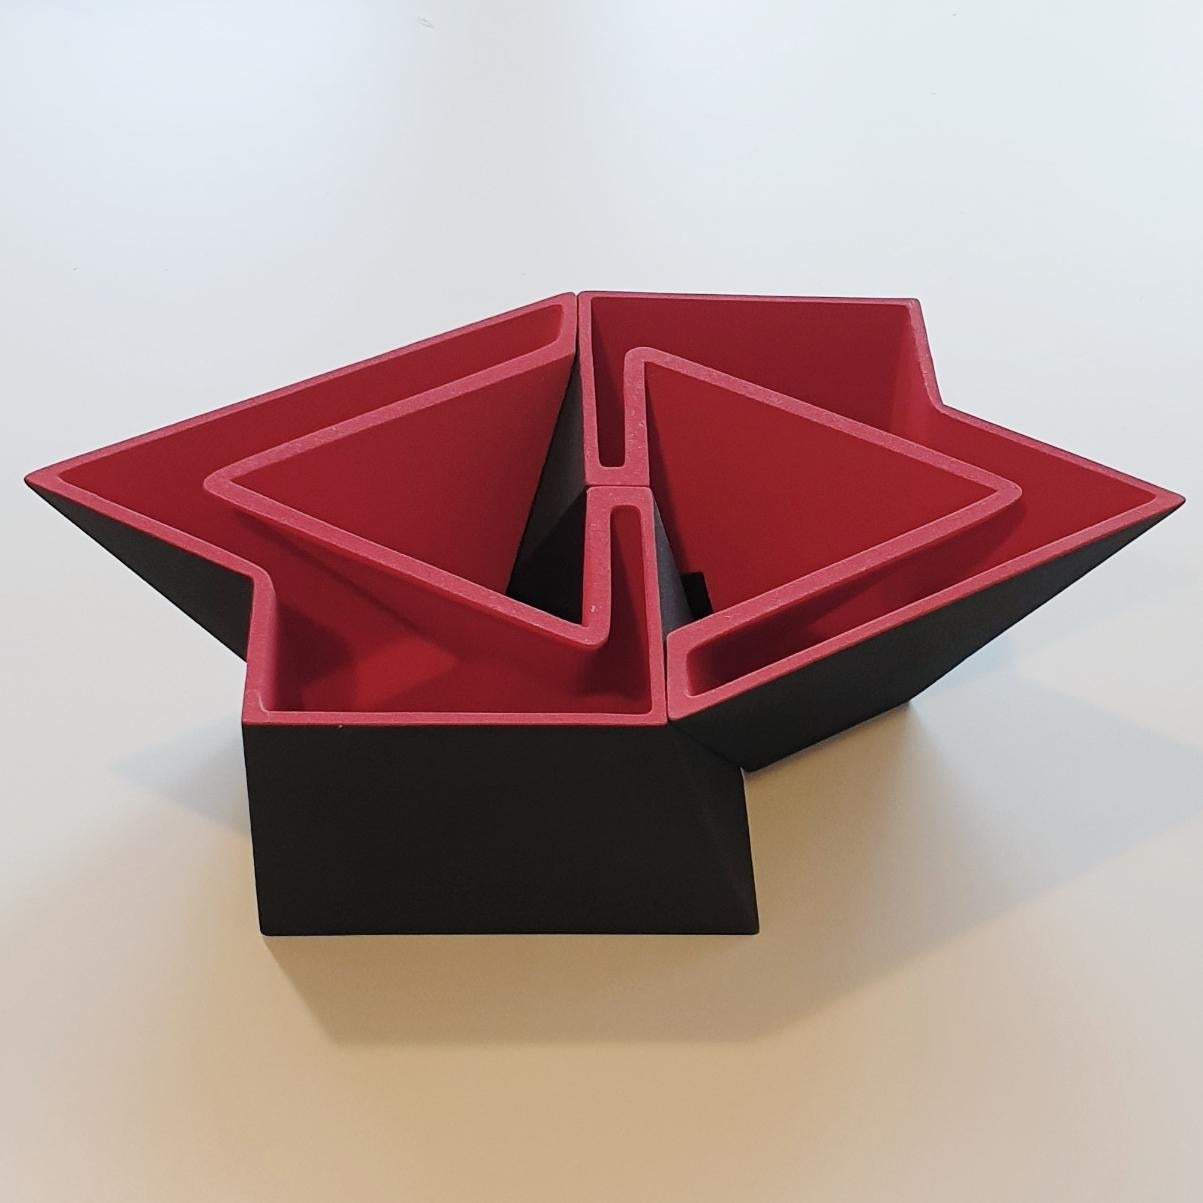 Let de Kok Abstract Sculpture - SC1503 red - contemporary modern abstract geometric ceramic object sculpture